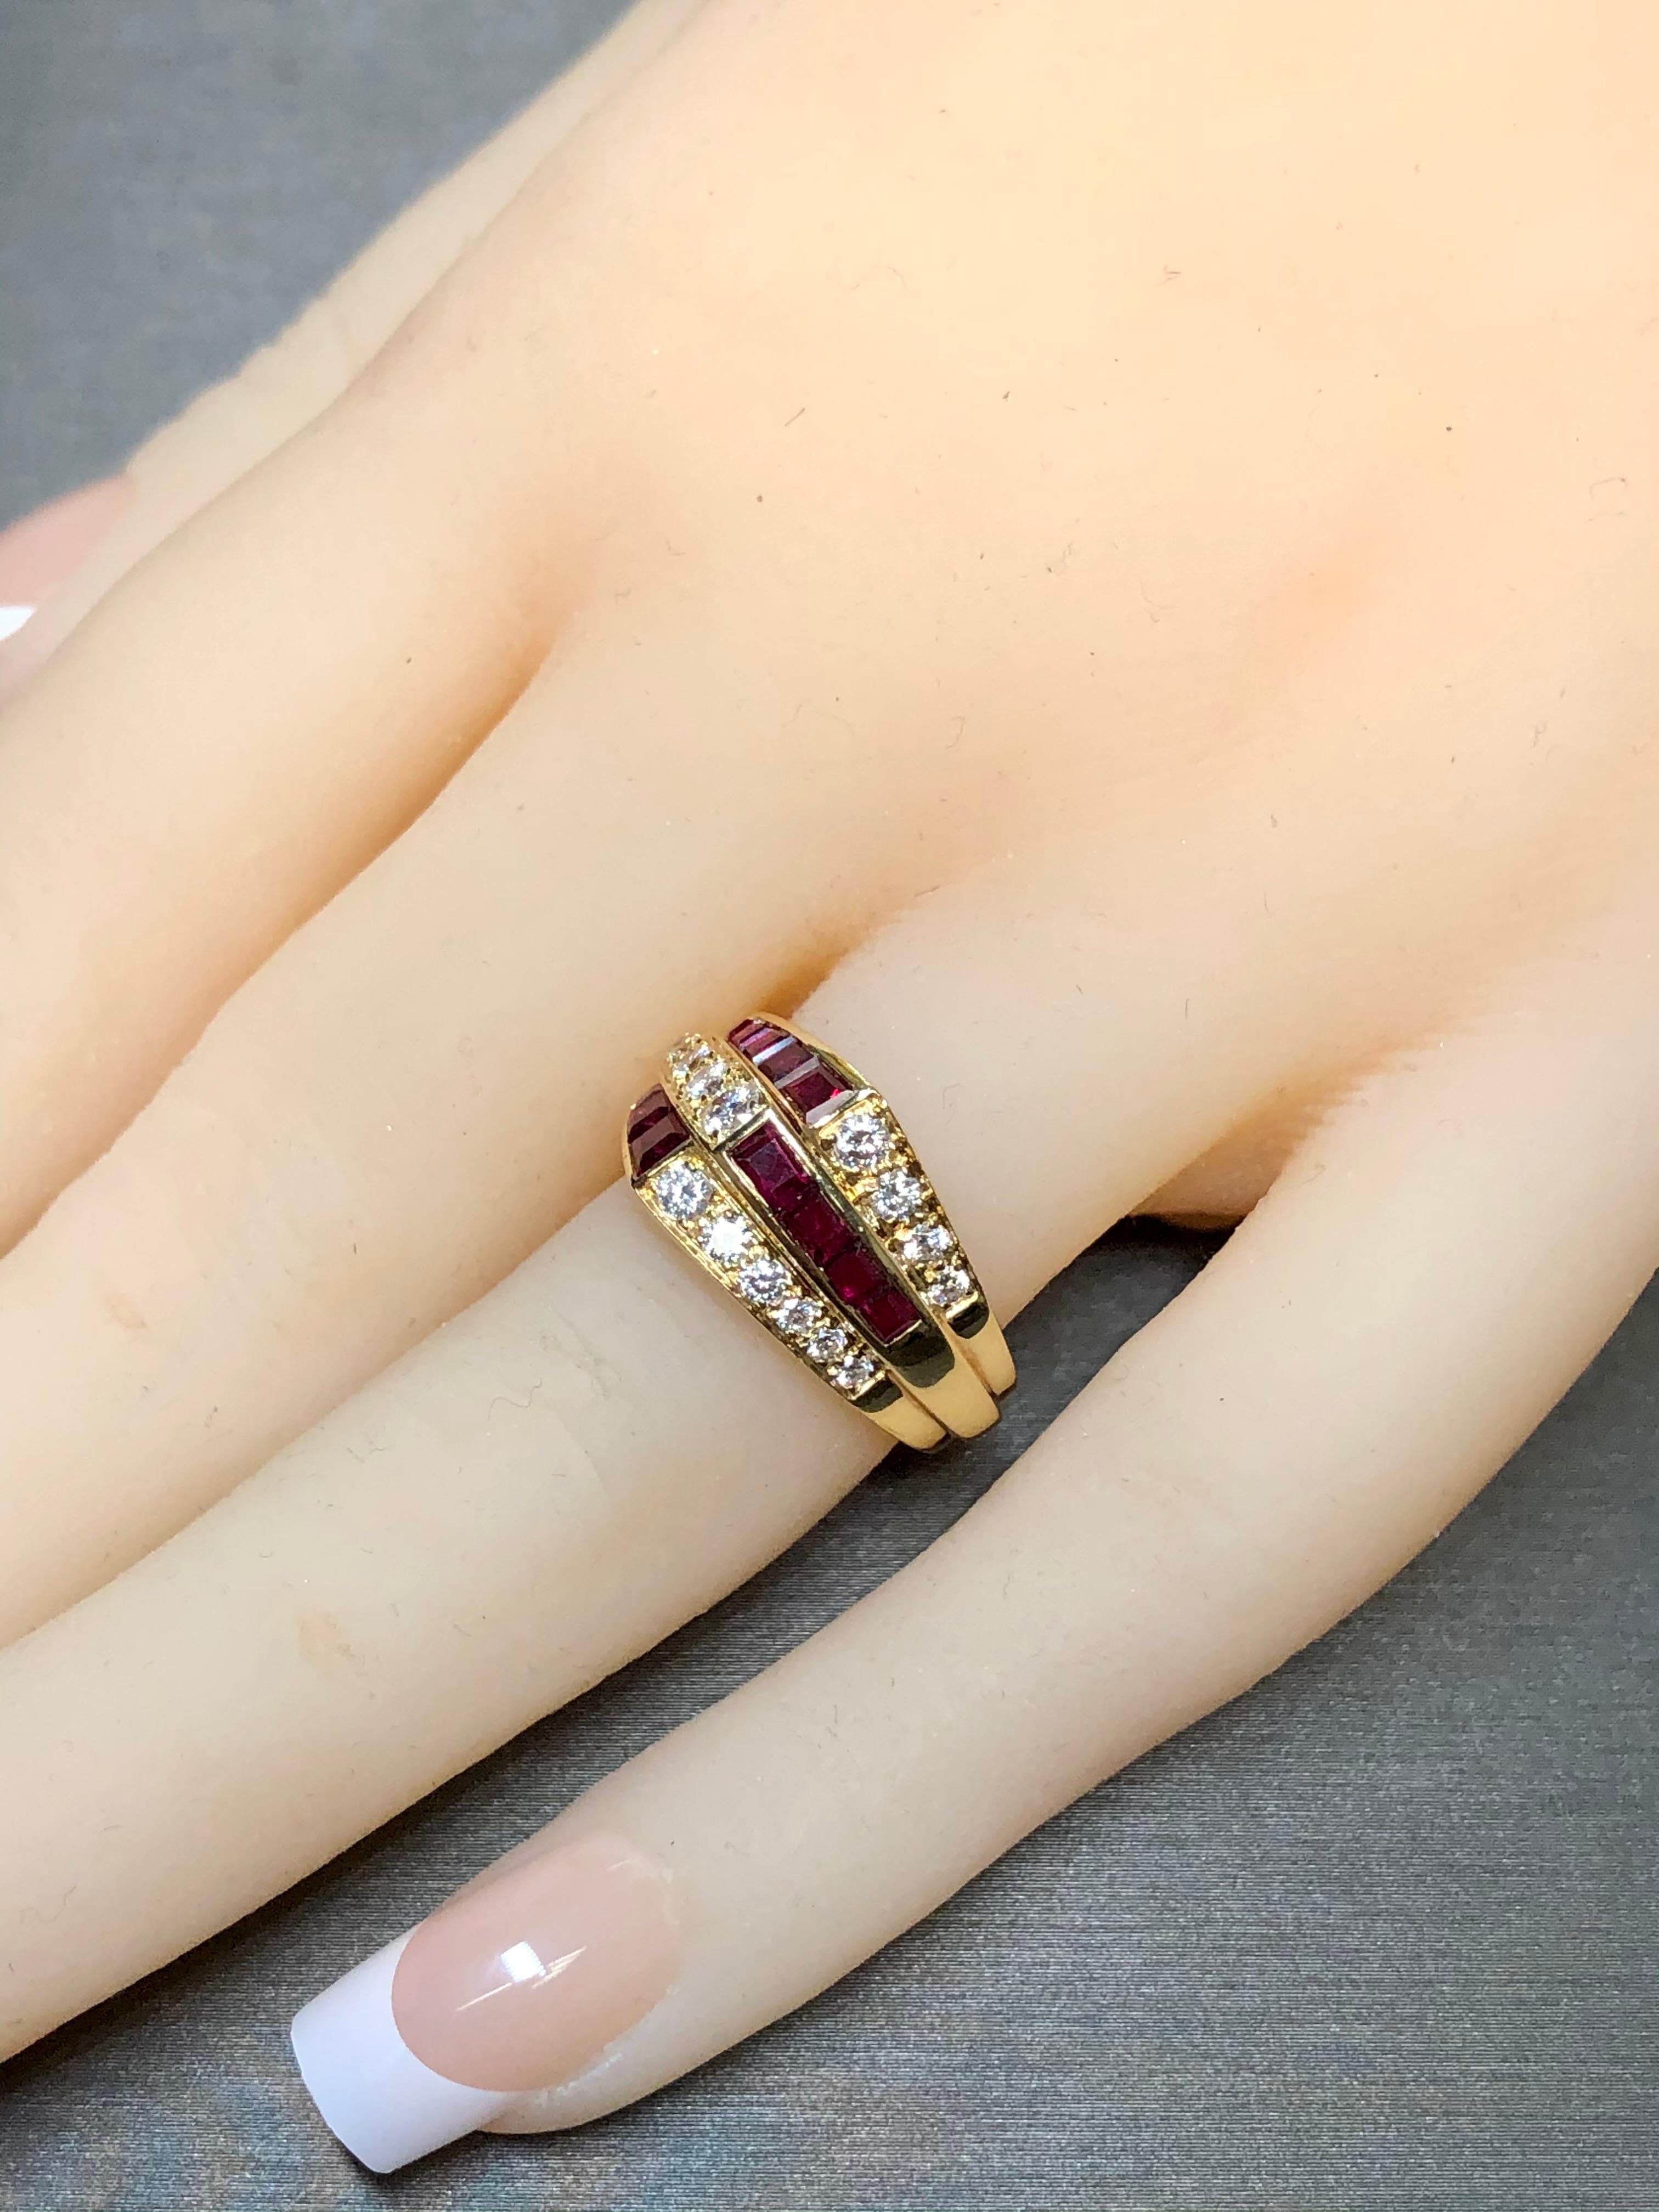 OSCAR HEYMAN 18K Ruby Diamond Cocktail Ring Sz 7.25 In Good Condition For Sale In Winter Springs, FL